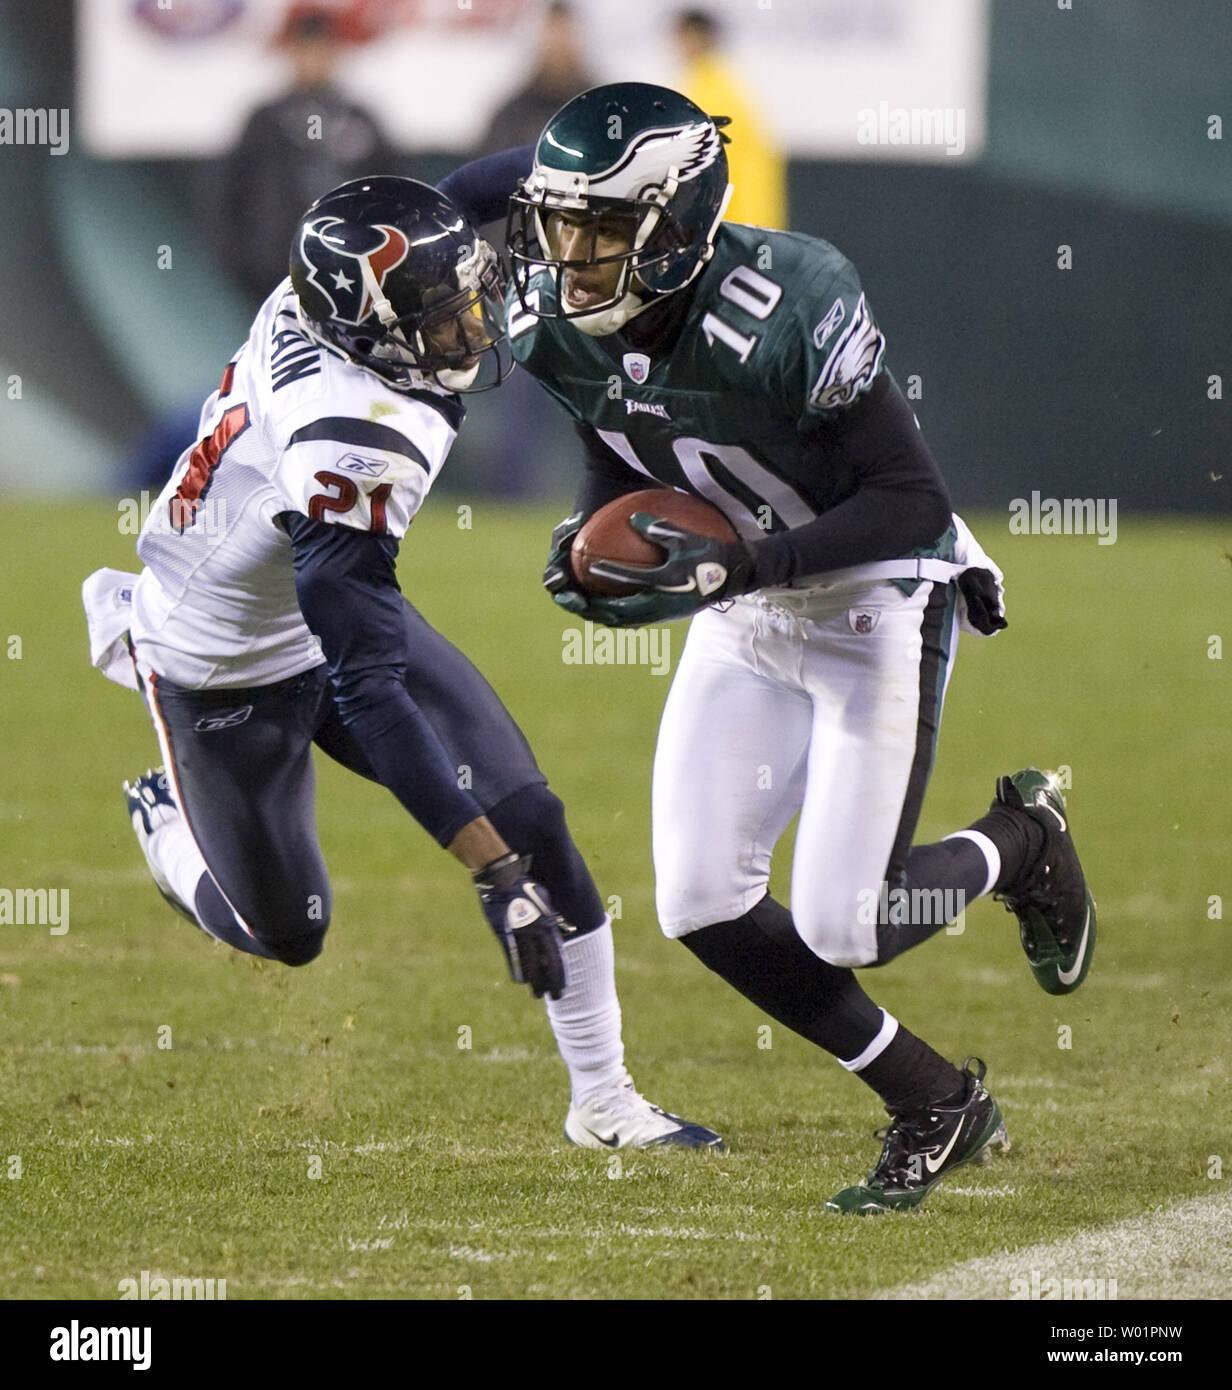 Philadelphia Eagles wide receiver DeSean Jackson evades the grasp of Houston Texans Brice McCain for a 21-yard gain during first quarter Philadelphia Eagles-Houston Texans game action in Philadelphia at Lincoln Financial Field December 2, 2010.    UPI/John Anderson Stock Photo